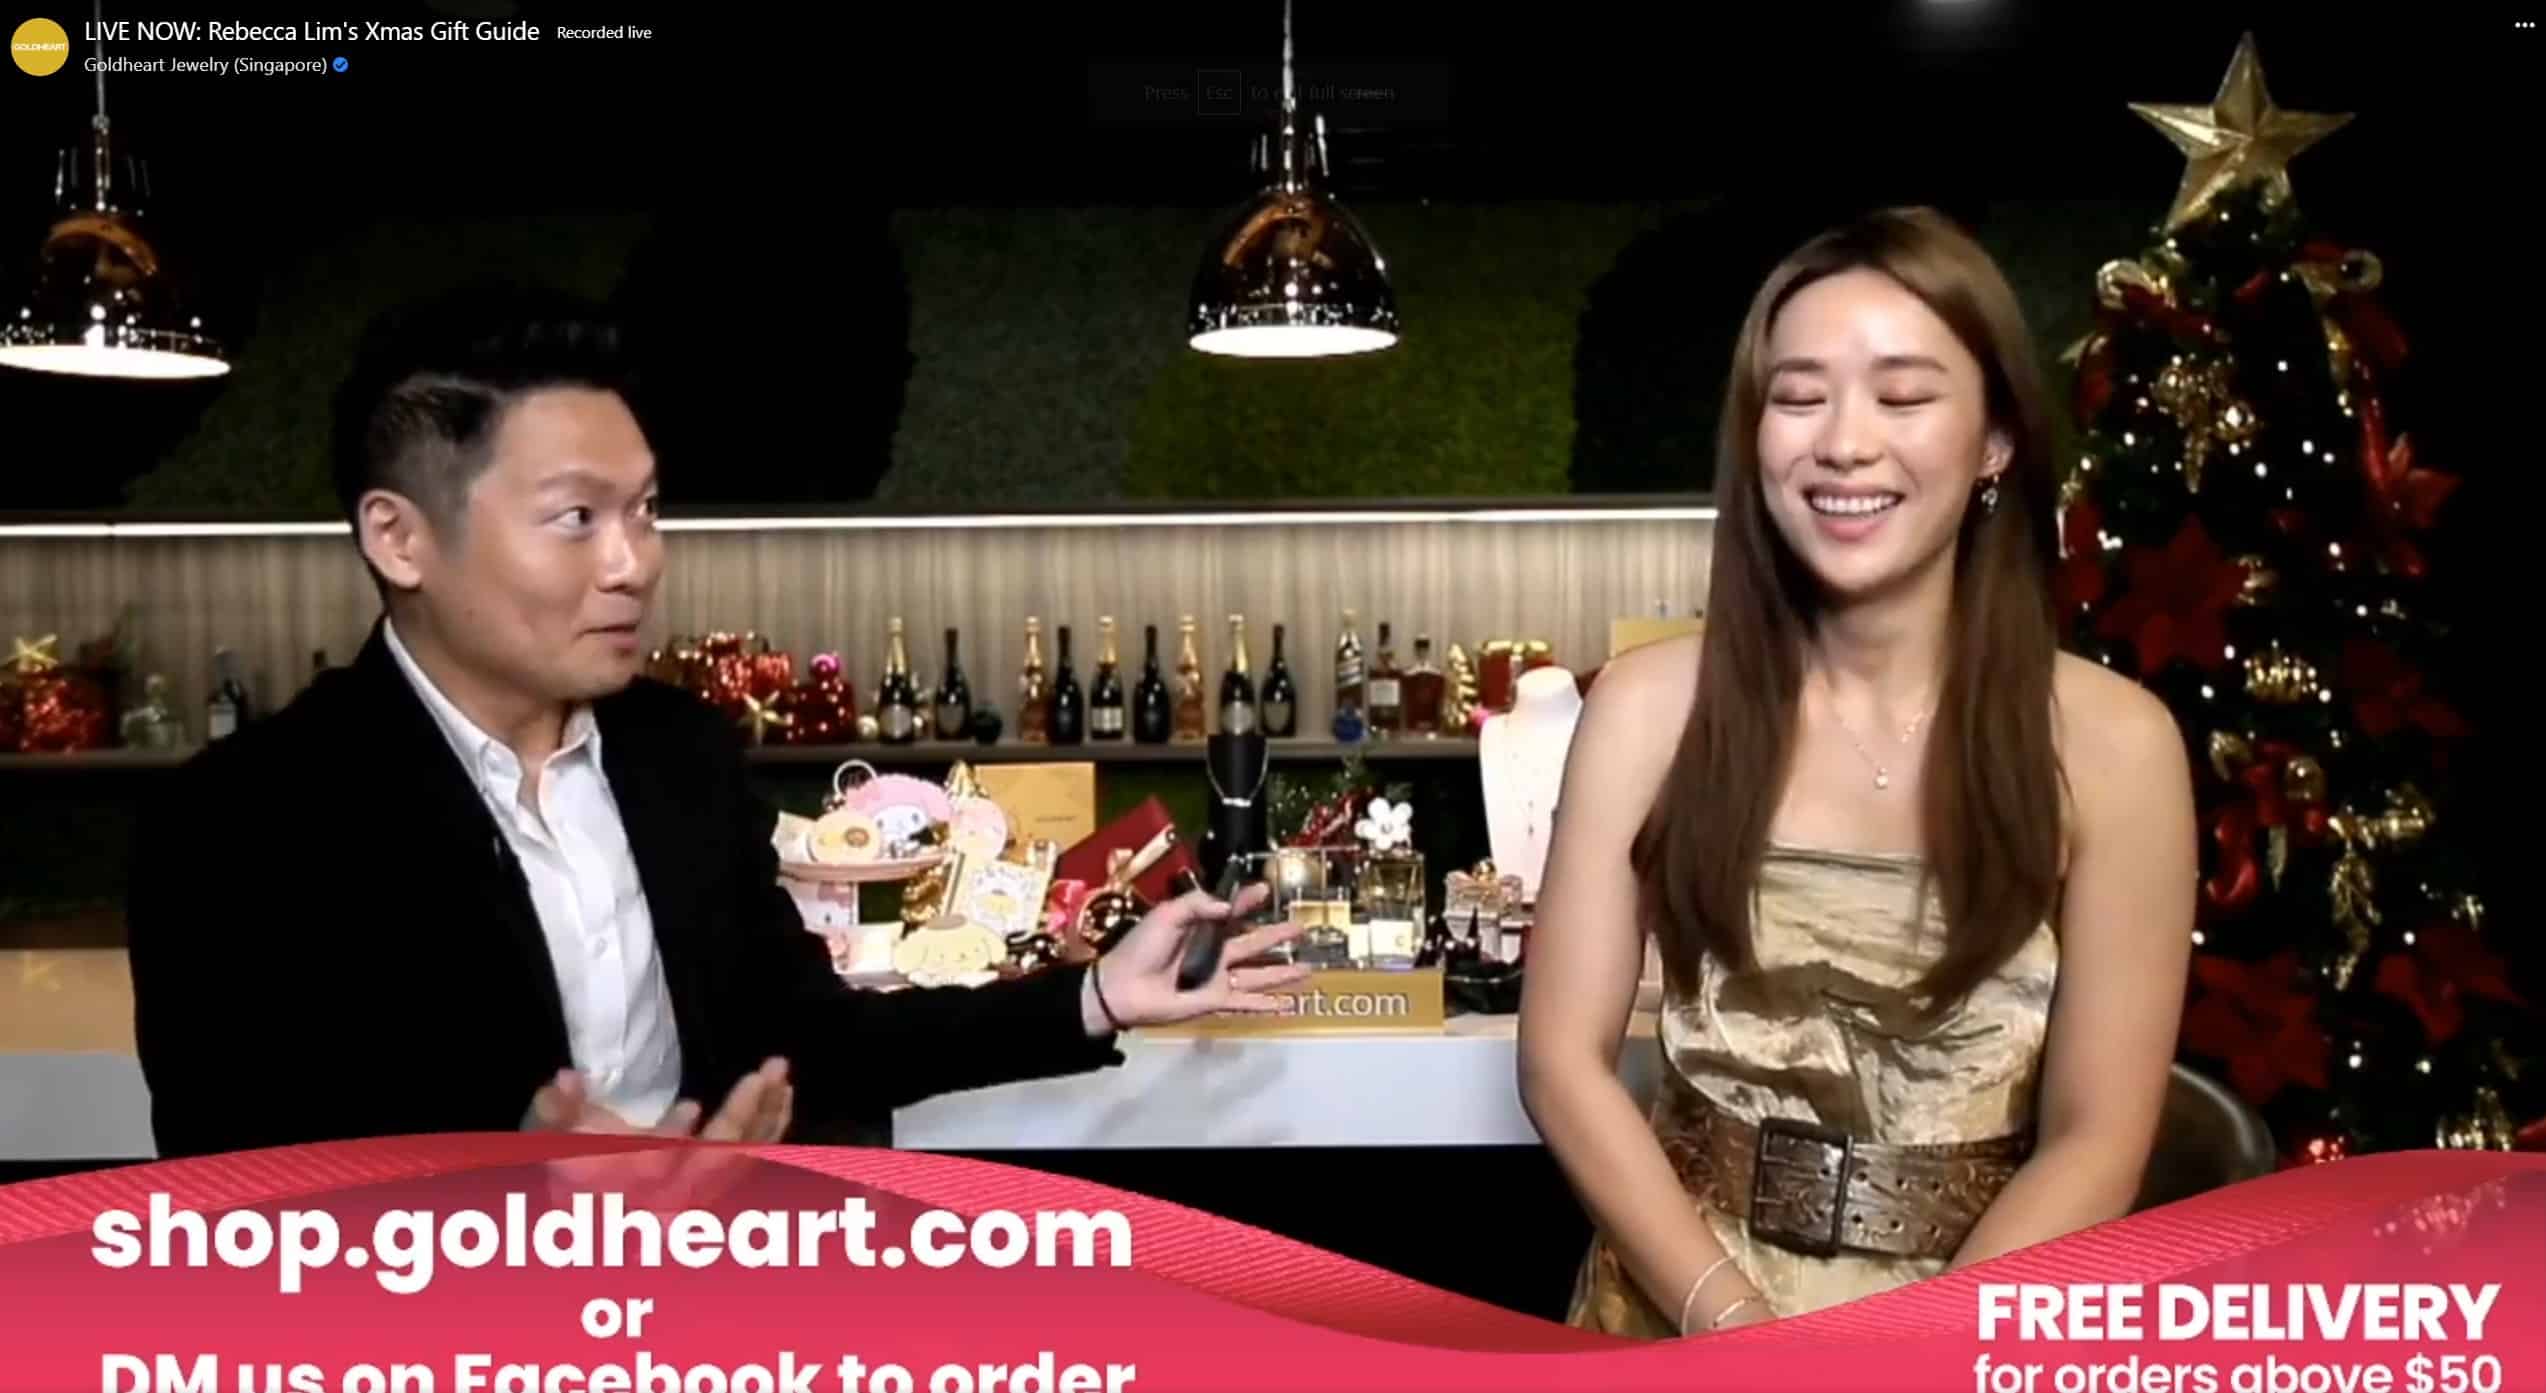 Virtual Events Emcee James Yang with Rebecca Lim & GoldHeart